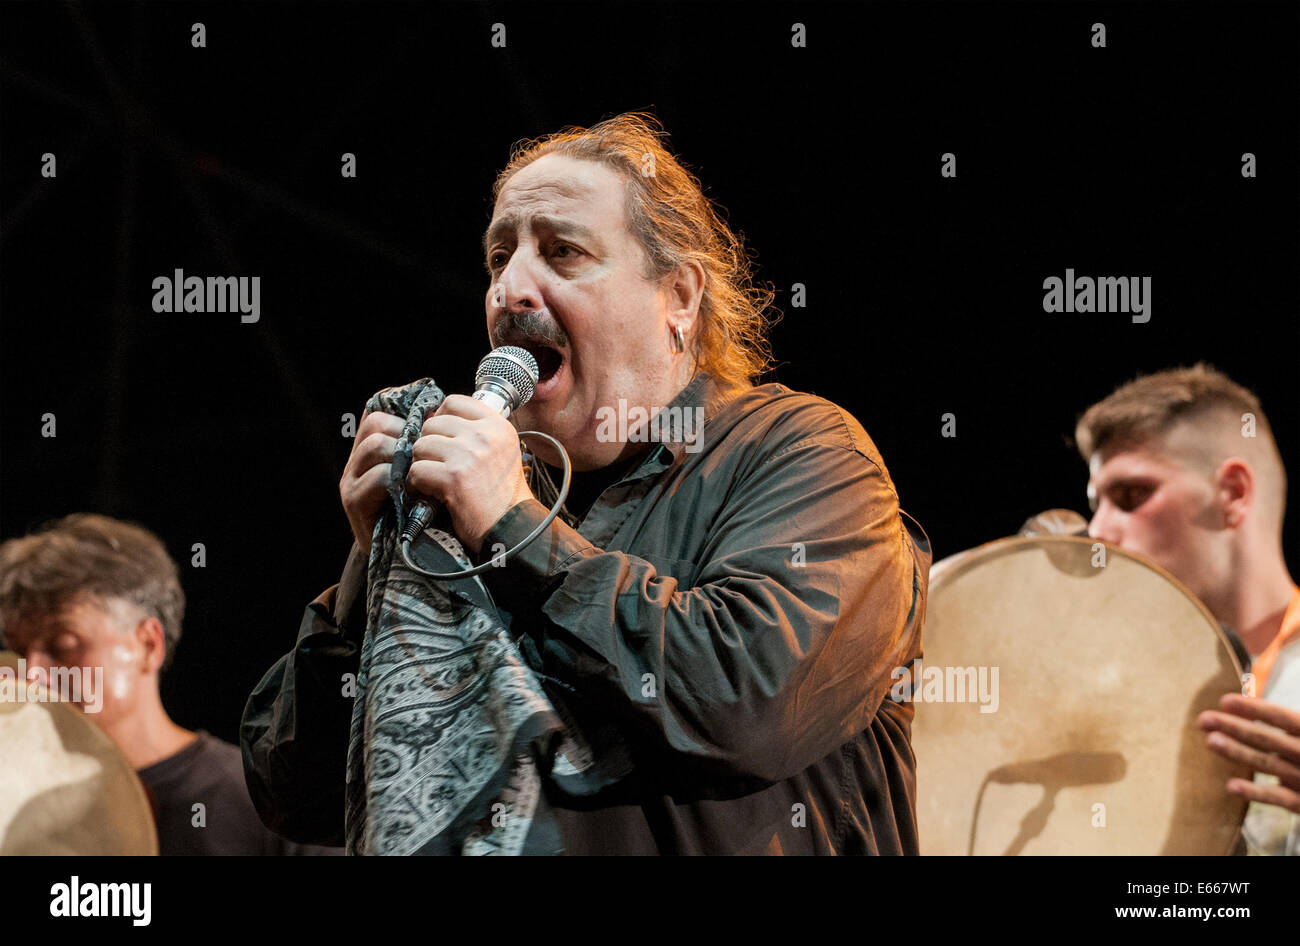 Marcello Colasurdo, singer-songwriter from Naples sings in Rotonda Diaz, Naples during the "Dock Of Sound ". © Emanuele Sessa/Pacific Press/Alamy Live News Stock Photo